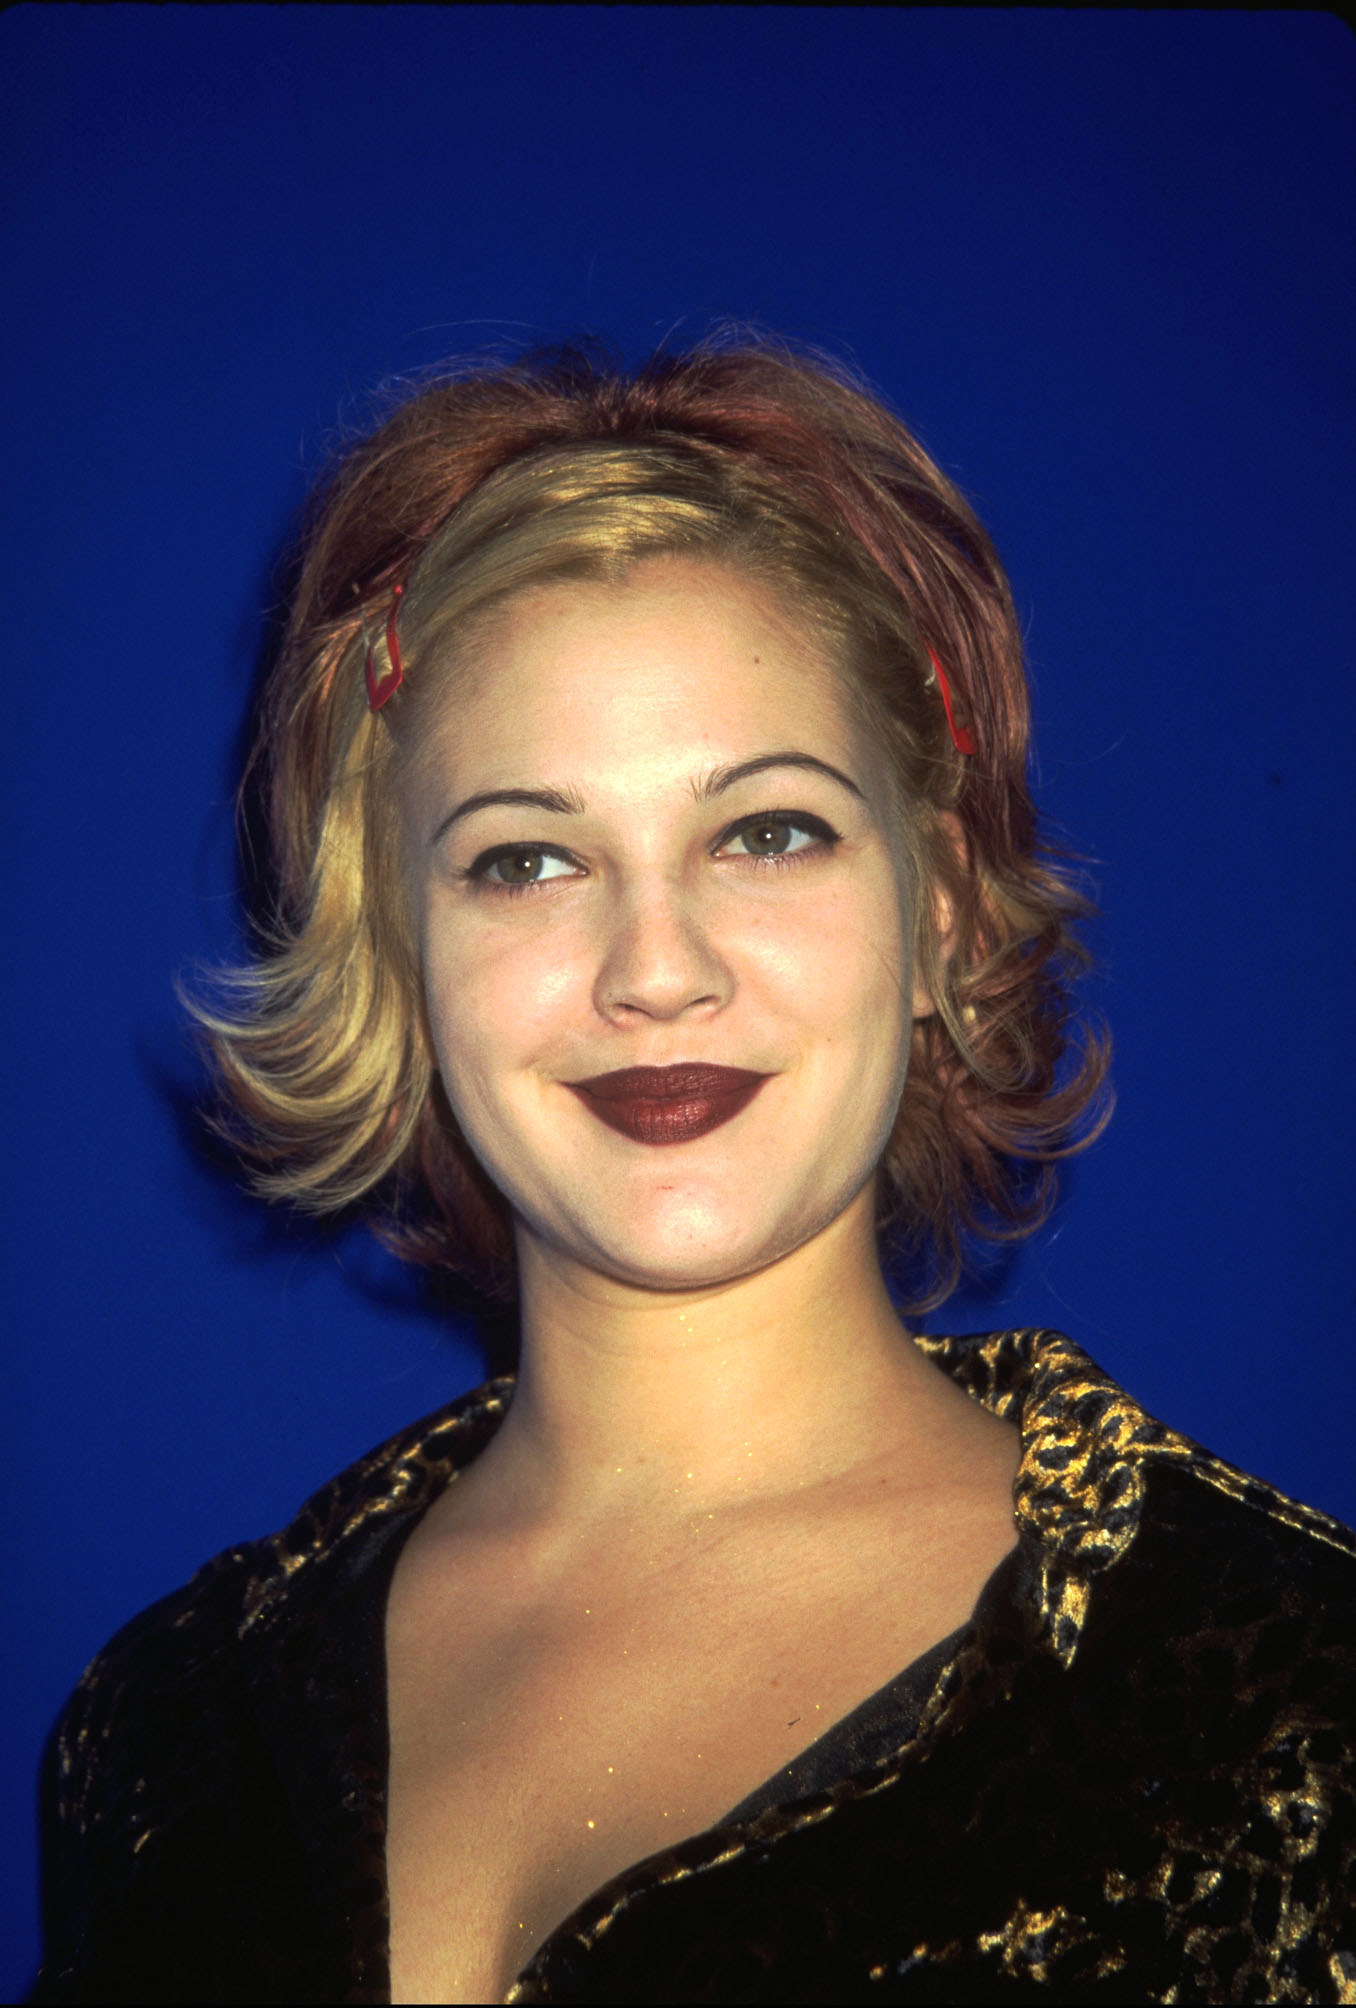 For reference, this was Drew Barrymore's look in the '90s. 